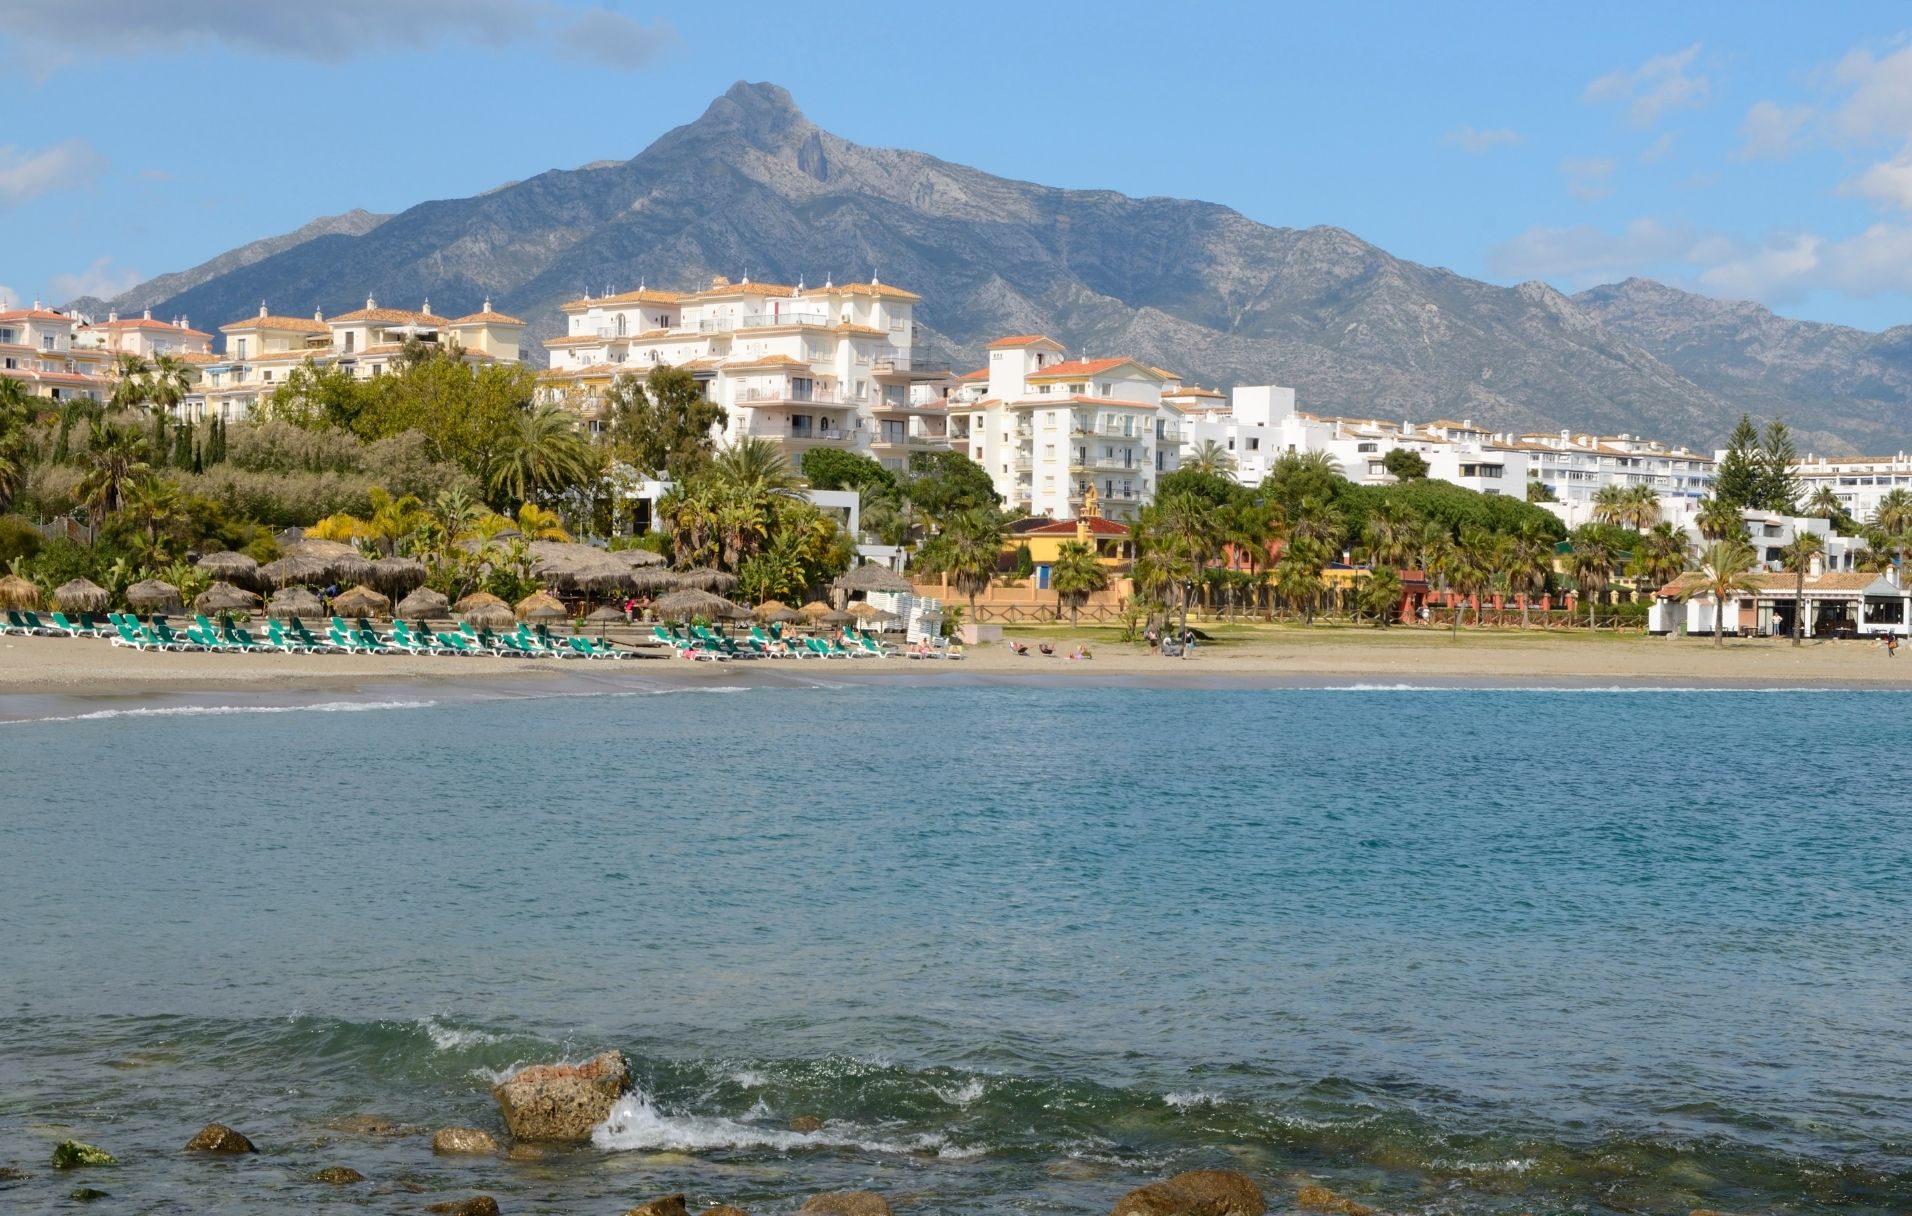 The luxury real estate market in Spain 2022 - real estate in Marbella